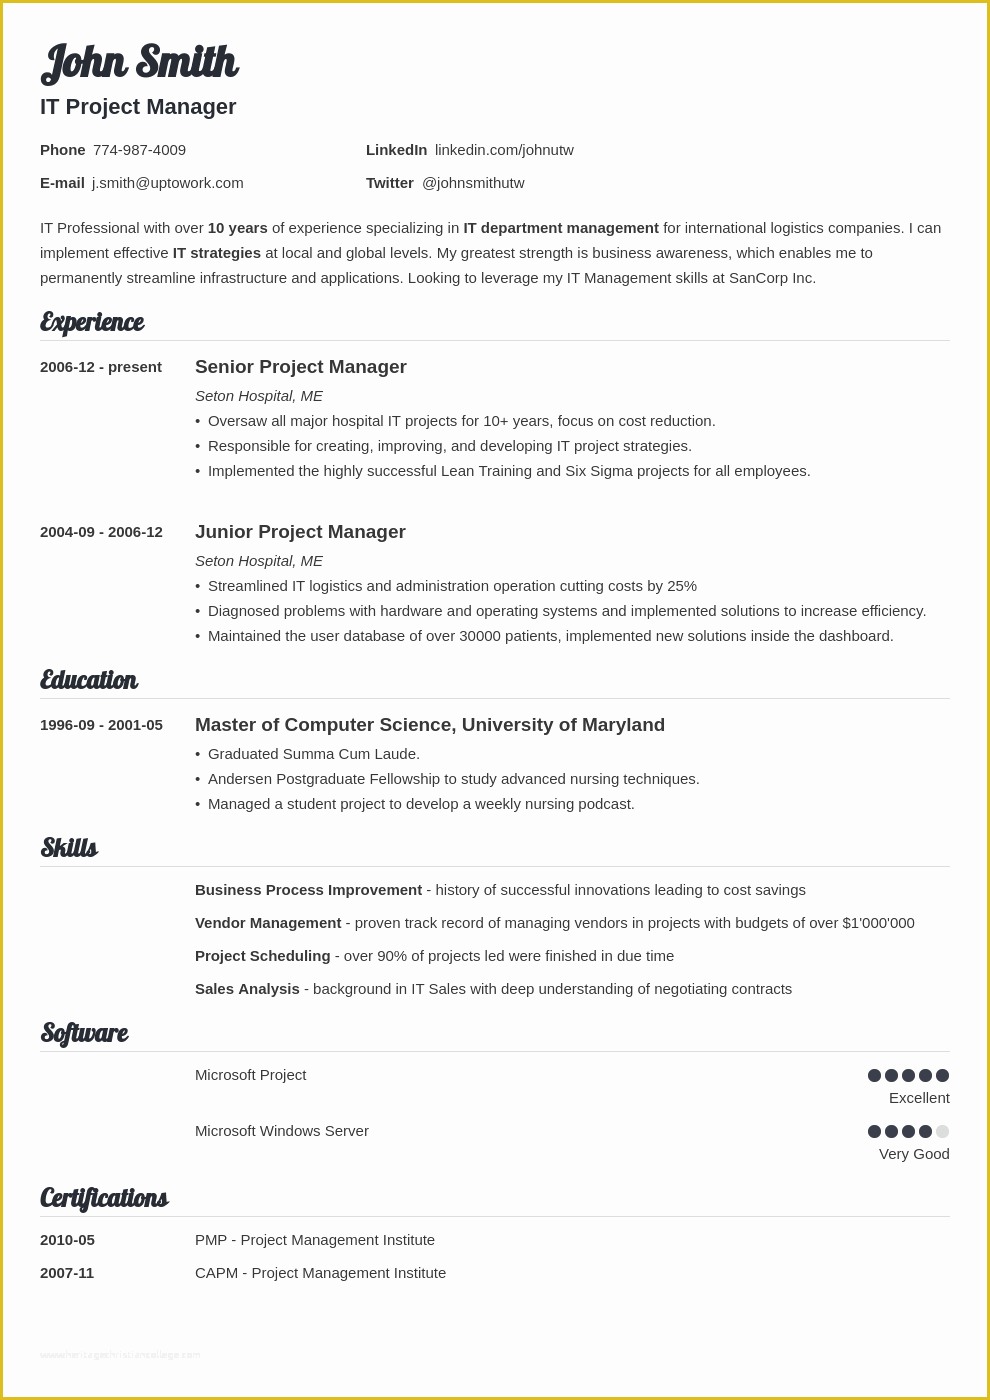 Free Education Resume Templates Of 20 Resume Templates Download A Professional Resume In 5